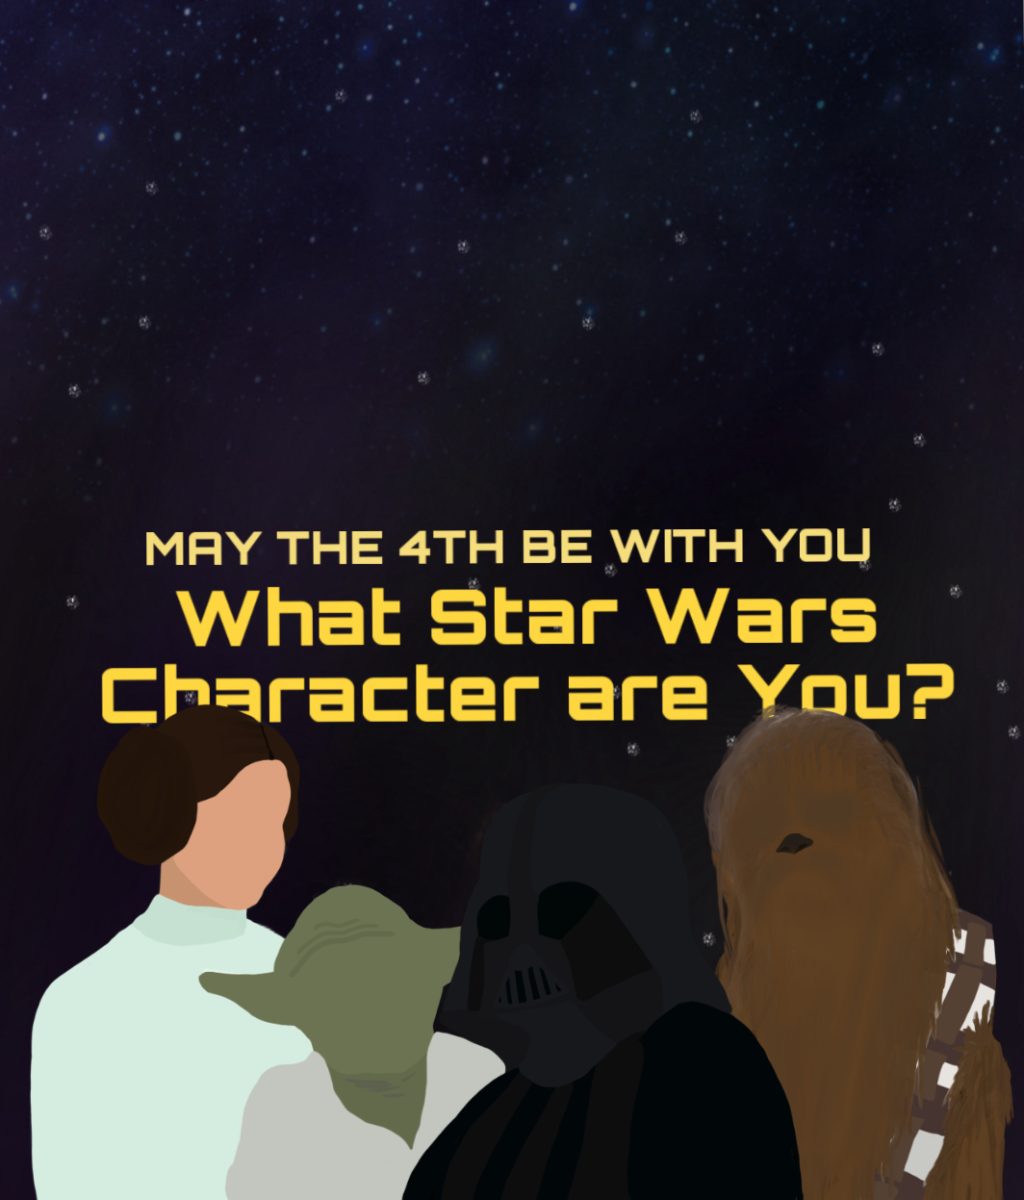 Take this quiz to figure out what Star Wars character you are - may the force be with you.